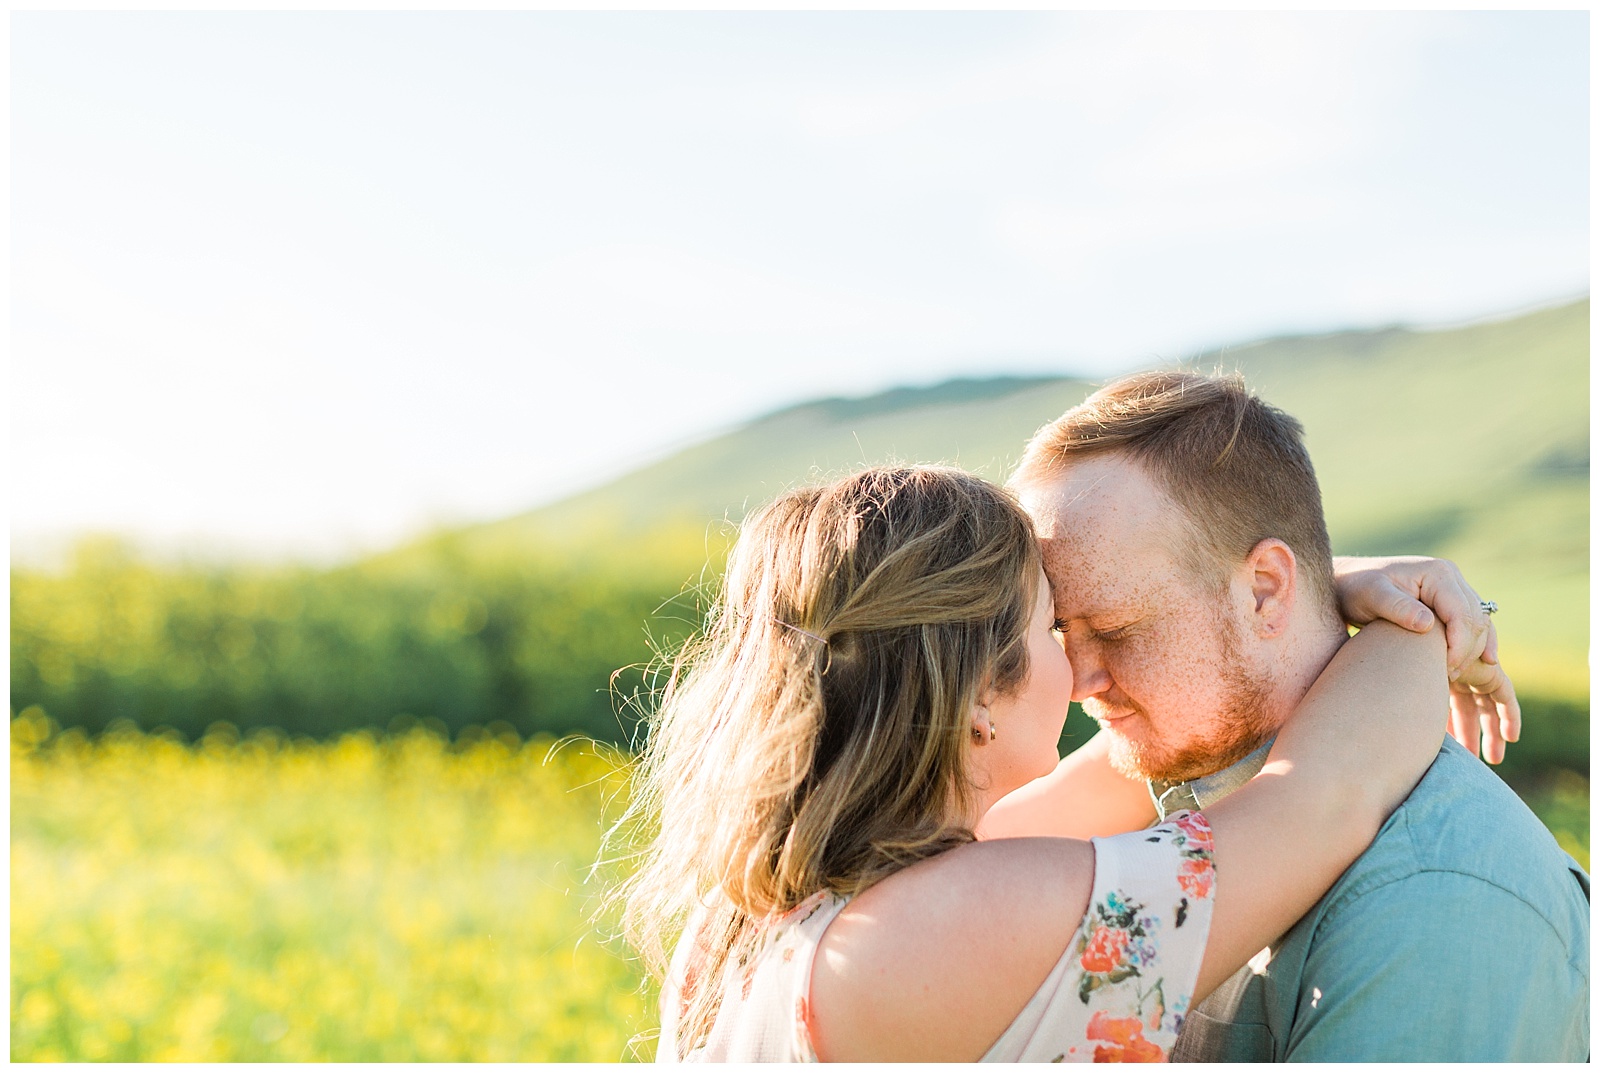 couple romantically embracing in a yellow wildflower field